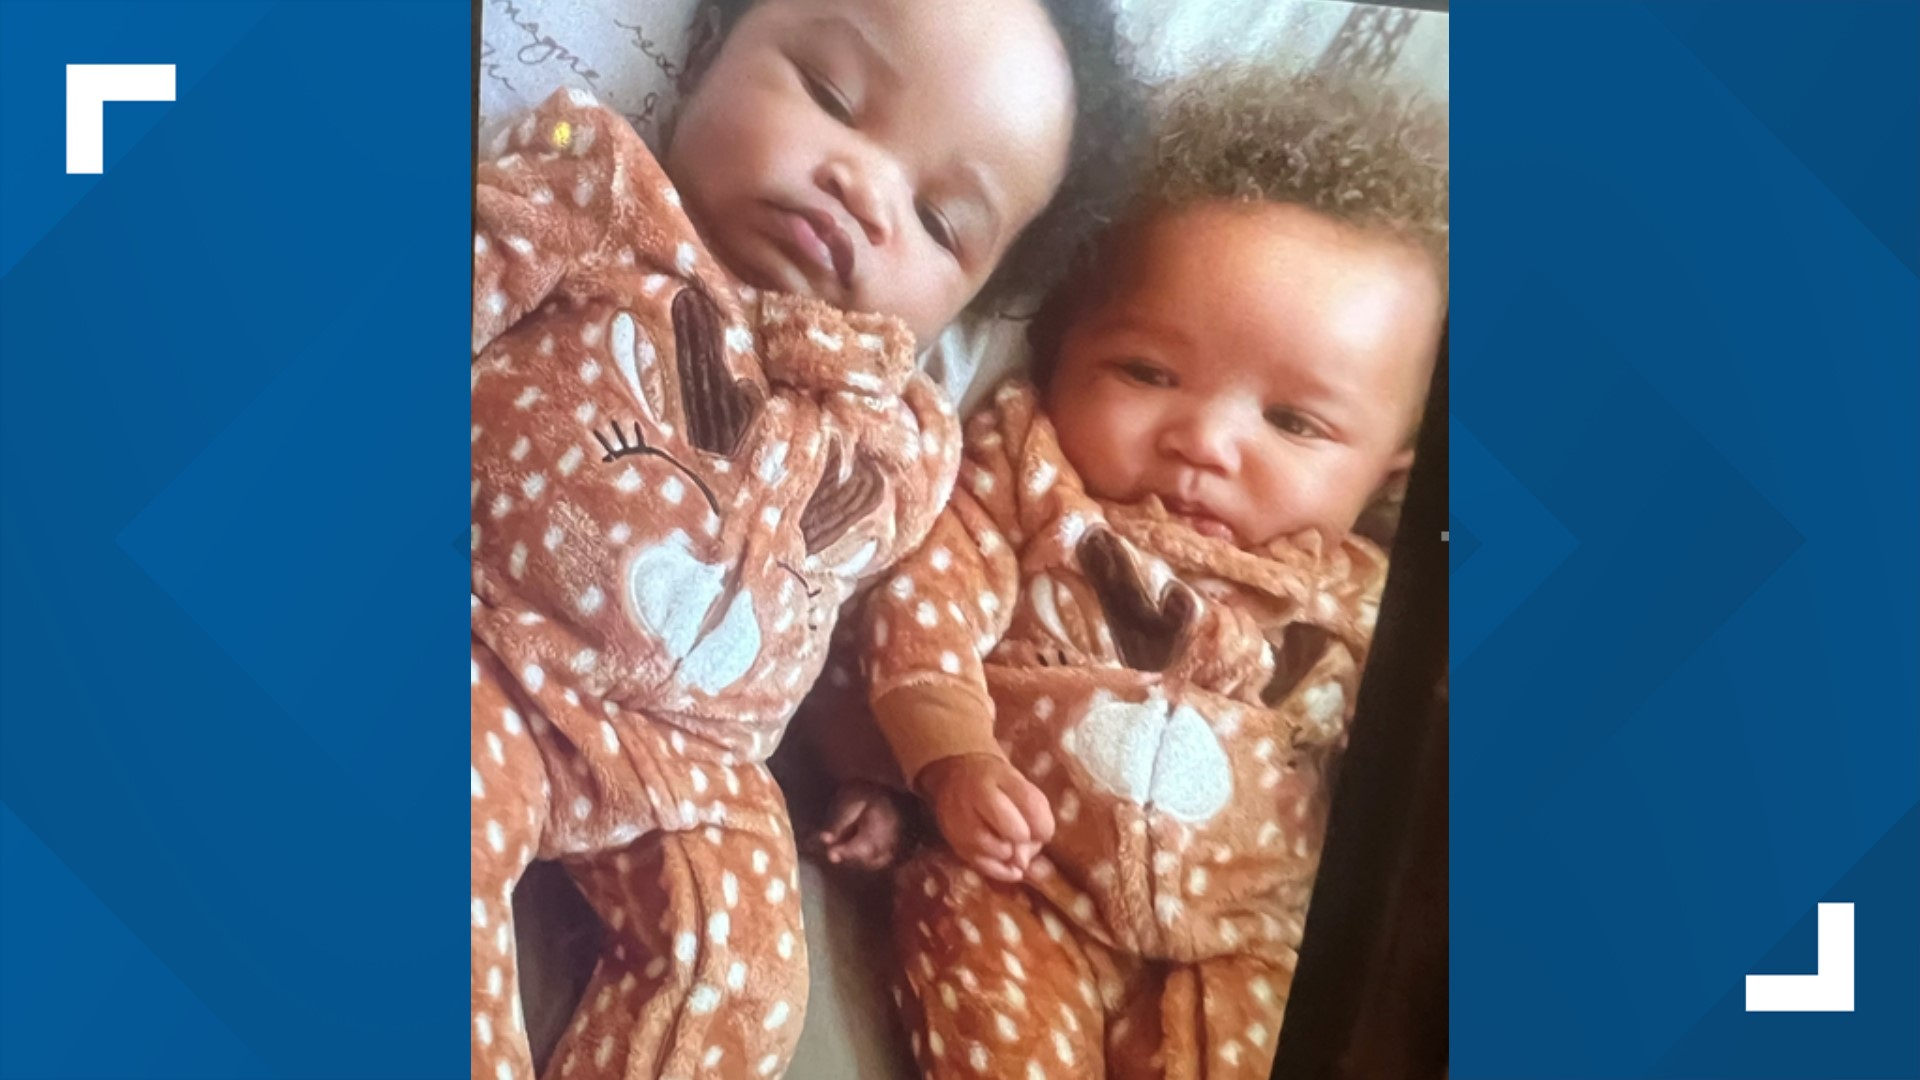 The 6-month-old, who was kidnapped along with his brother last year, was pronounced dead just before midnight Saturday.